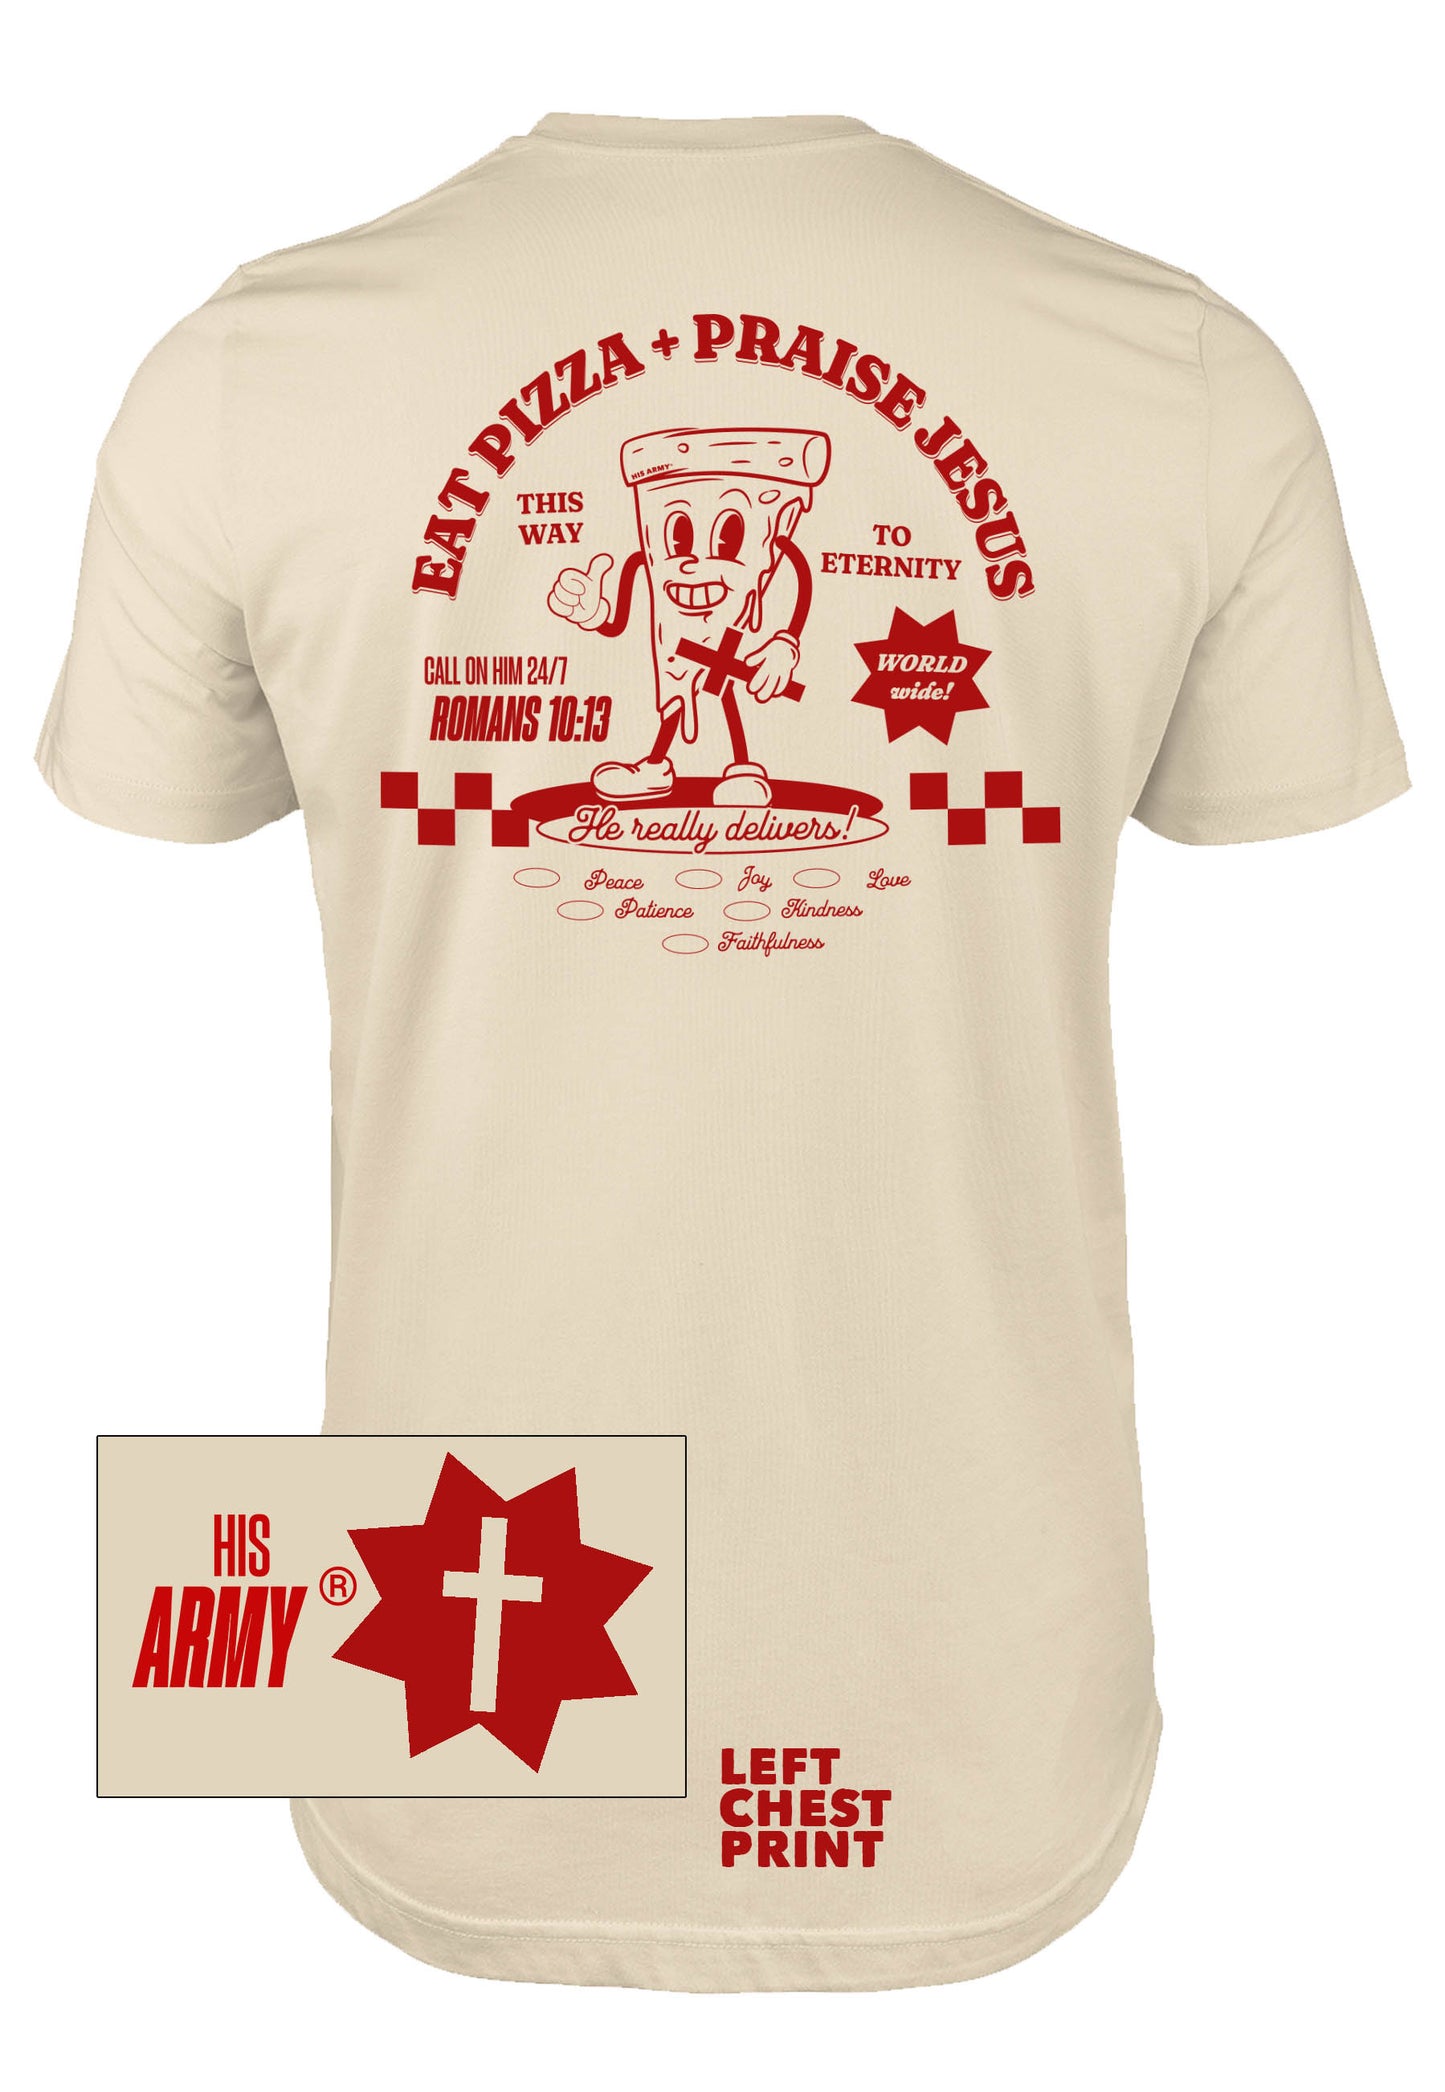 Jesus and Pizza t-shirt